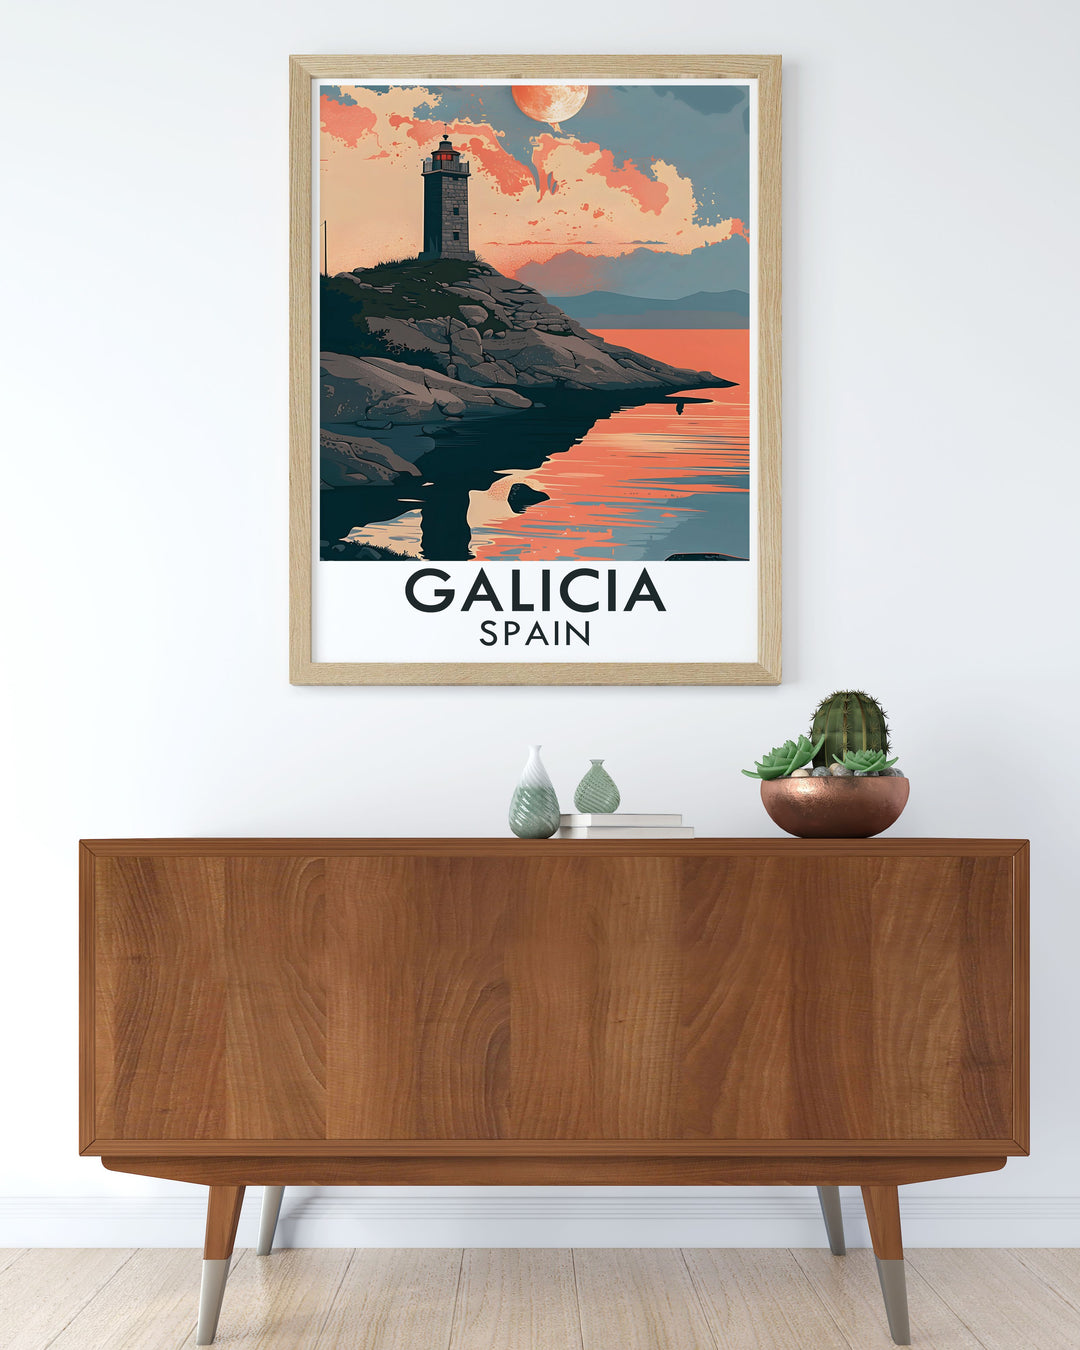 A vibrant depiction of the Tower of Hercules, capturing its timeless beauty and the surrounding natural landscapes of Galicia.